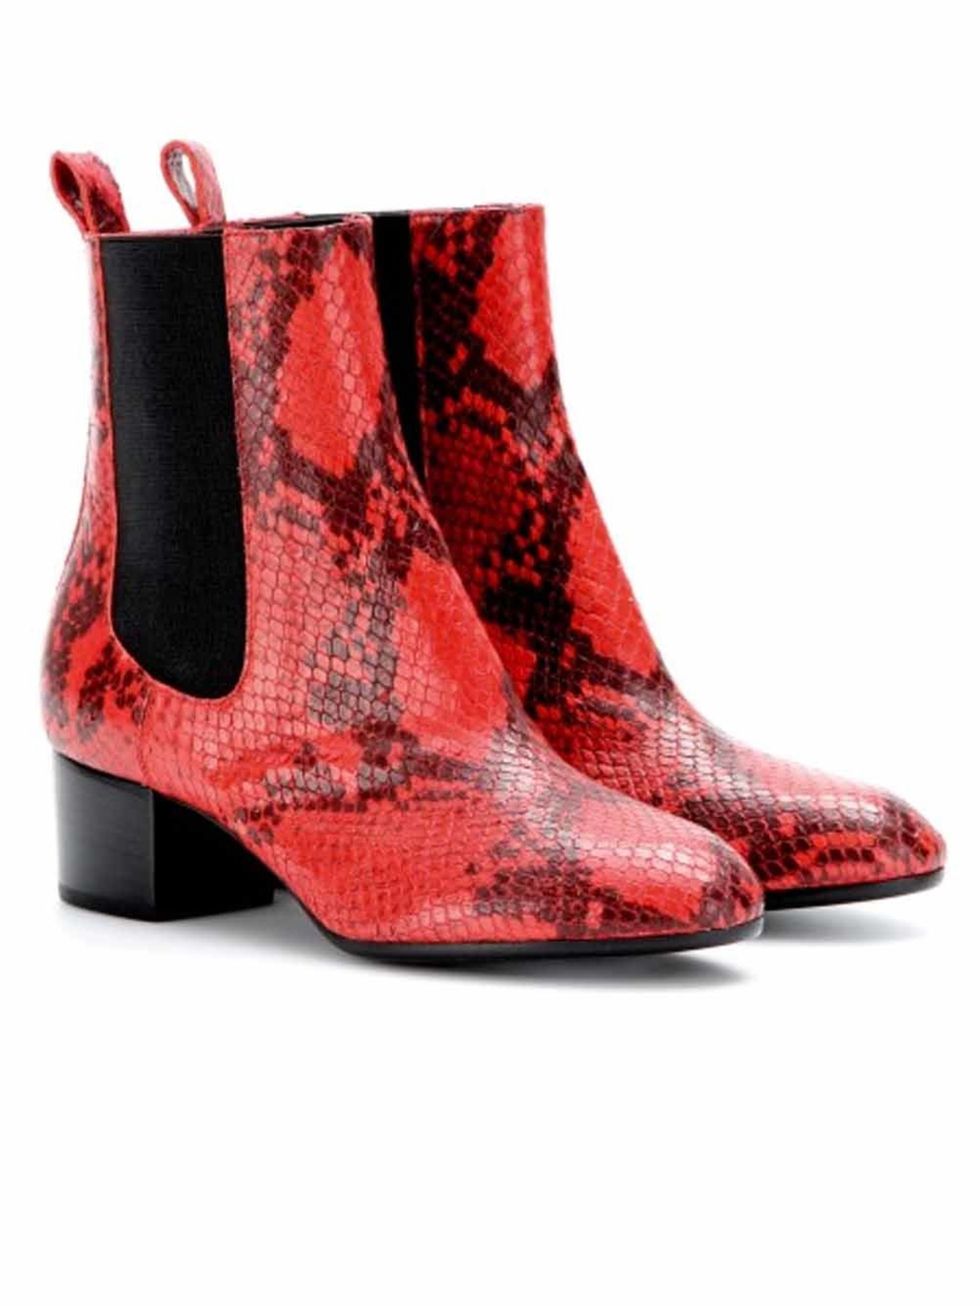 Footwear, Red, Boot, Carmine, Fashion, Black, Maroon, Pattern, Leather, Synthetic rubber, 